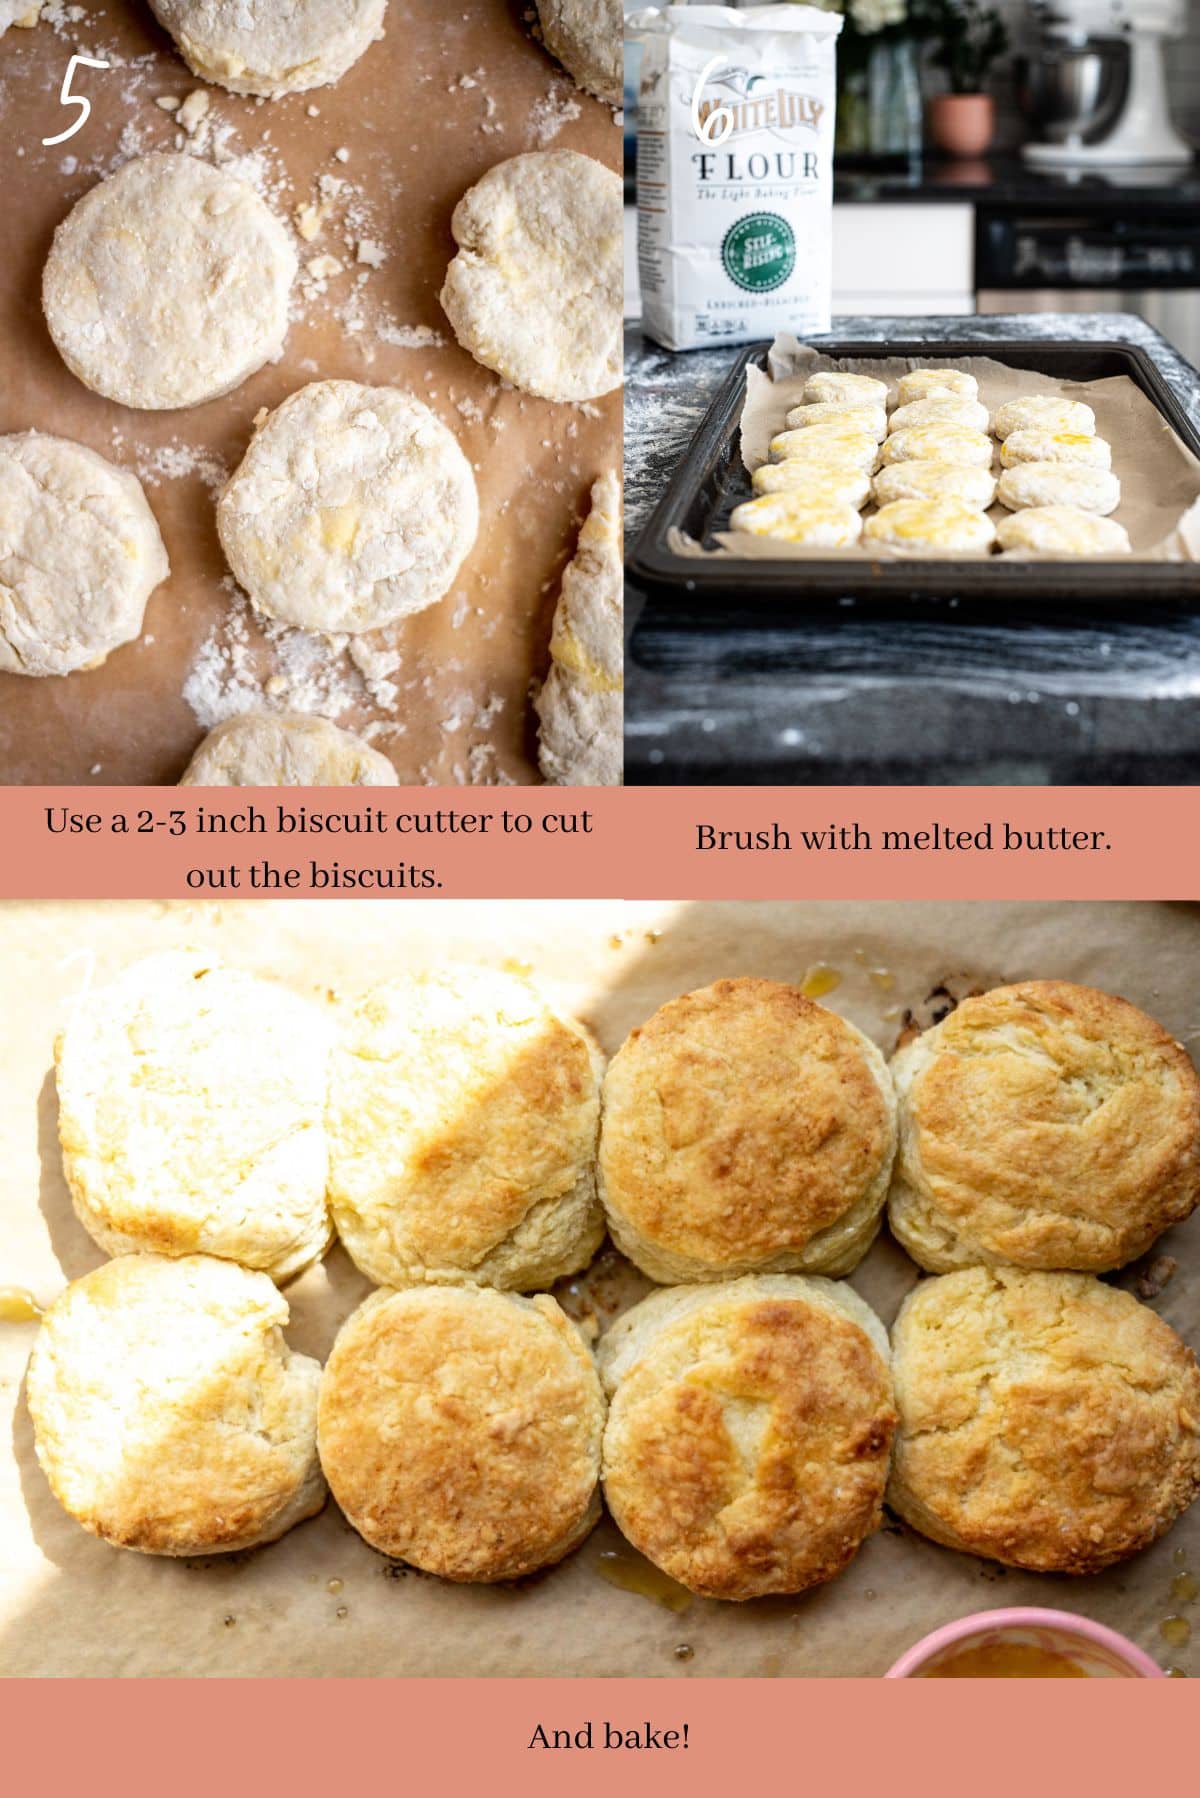 Collage showing how to make the biscuits.